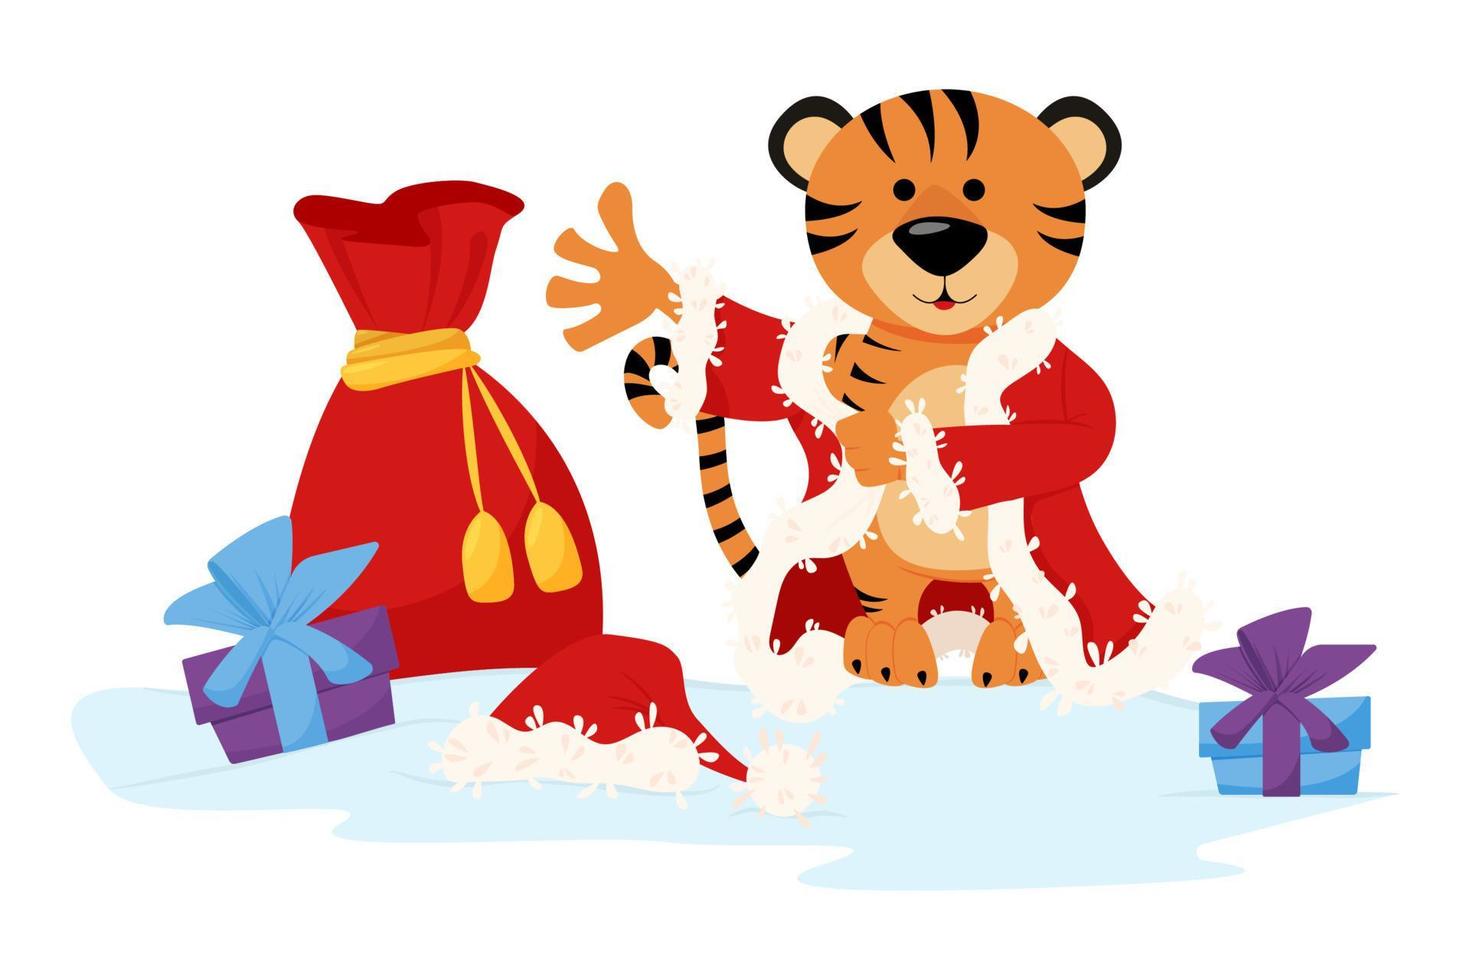 Tiger Santa Claus illustration. Isolated on white backround. vector